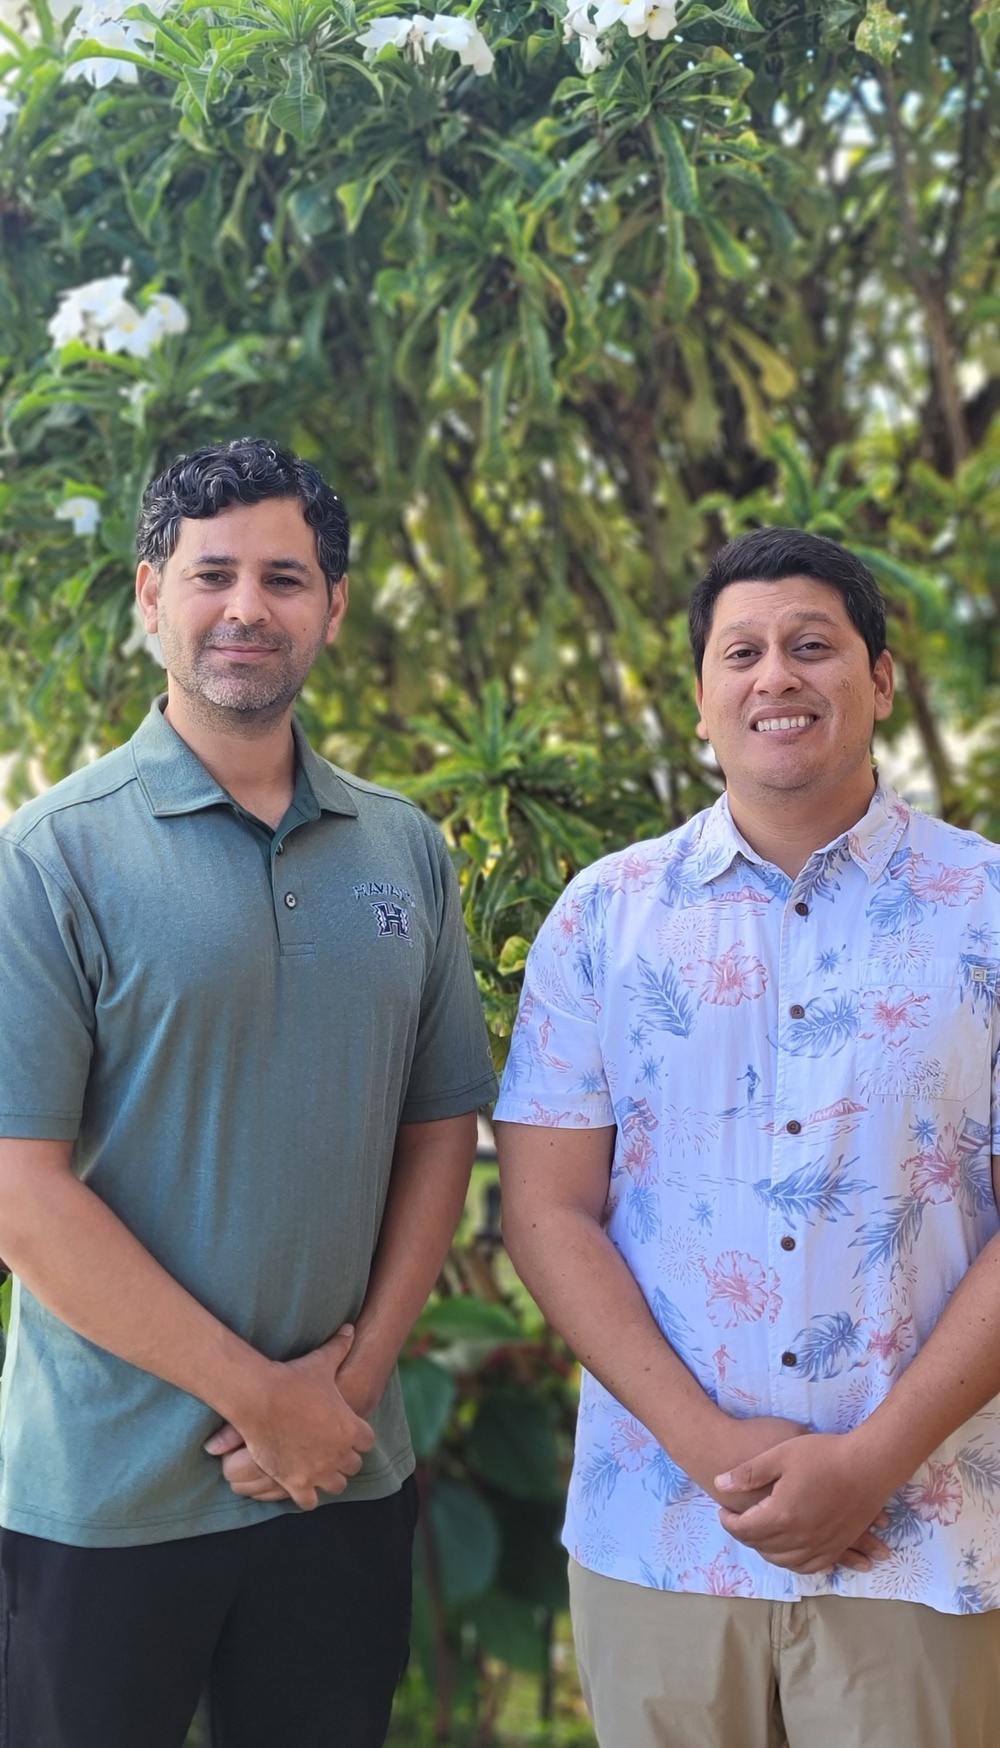 Four NIWC Pacific SMART scholars receive Scholar and Mentor of the Year awards